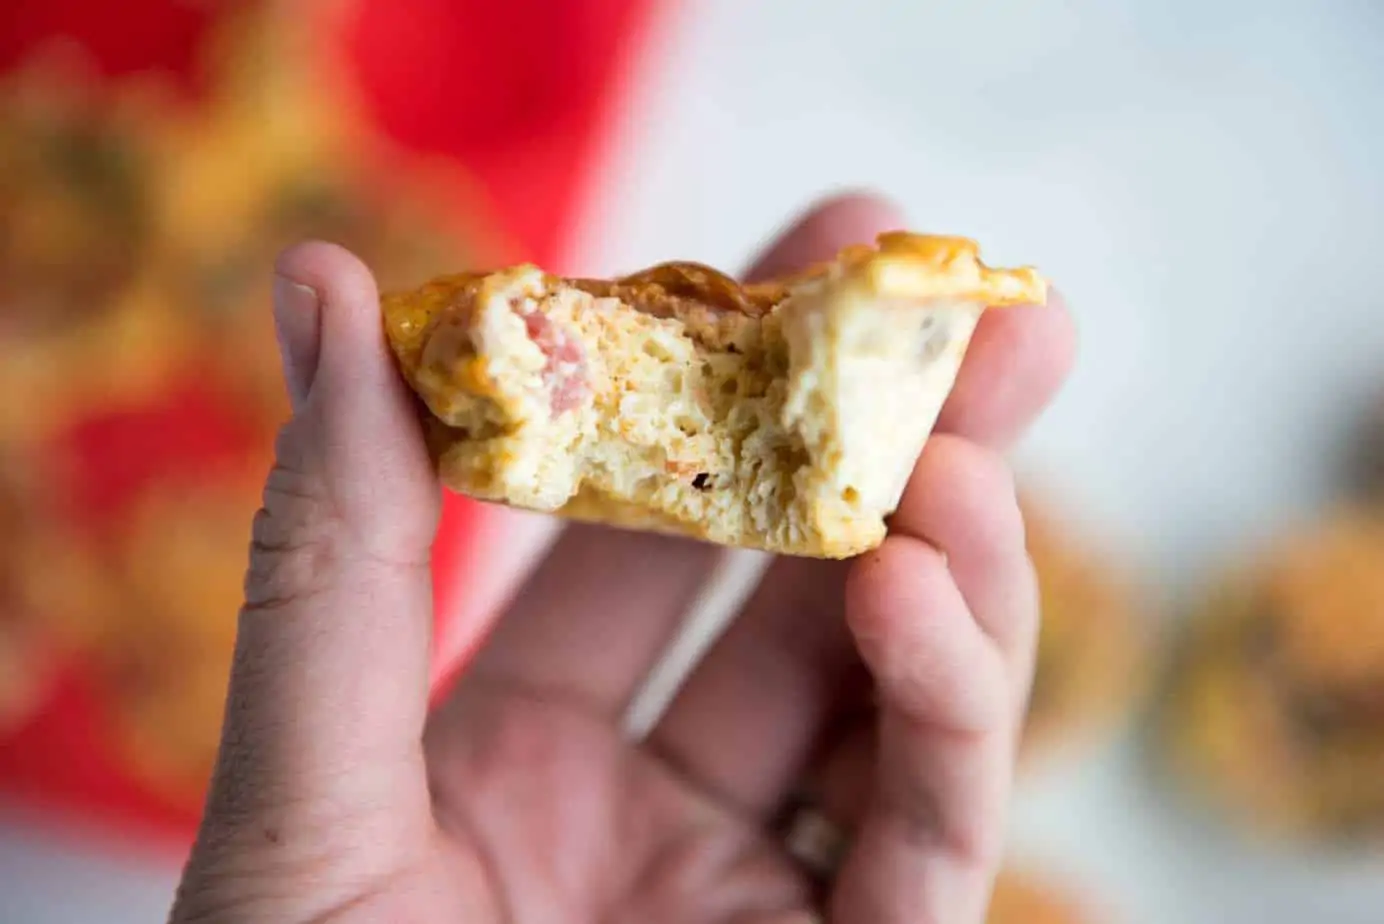 Paleo Pizza Egg muffins - a gluten-free and dairy-free make ahead breakfast recipe that is easily portable